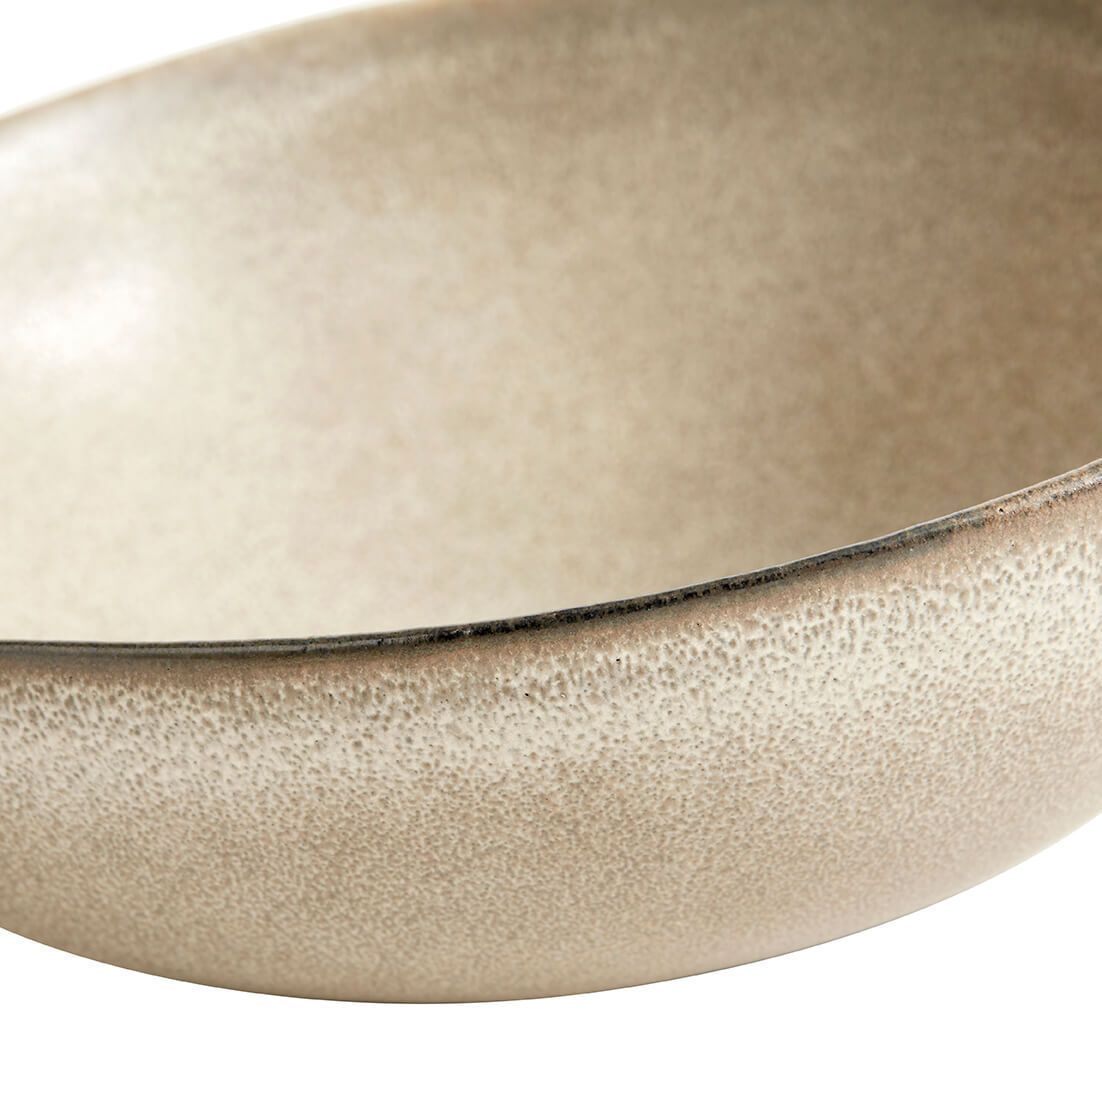 Muubs Mame Mad Bowl Oysters, 14,5 cm